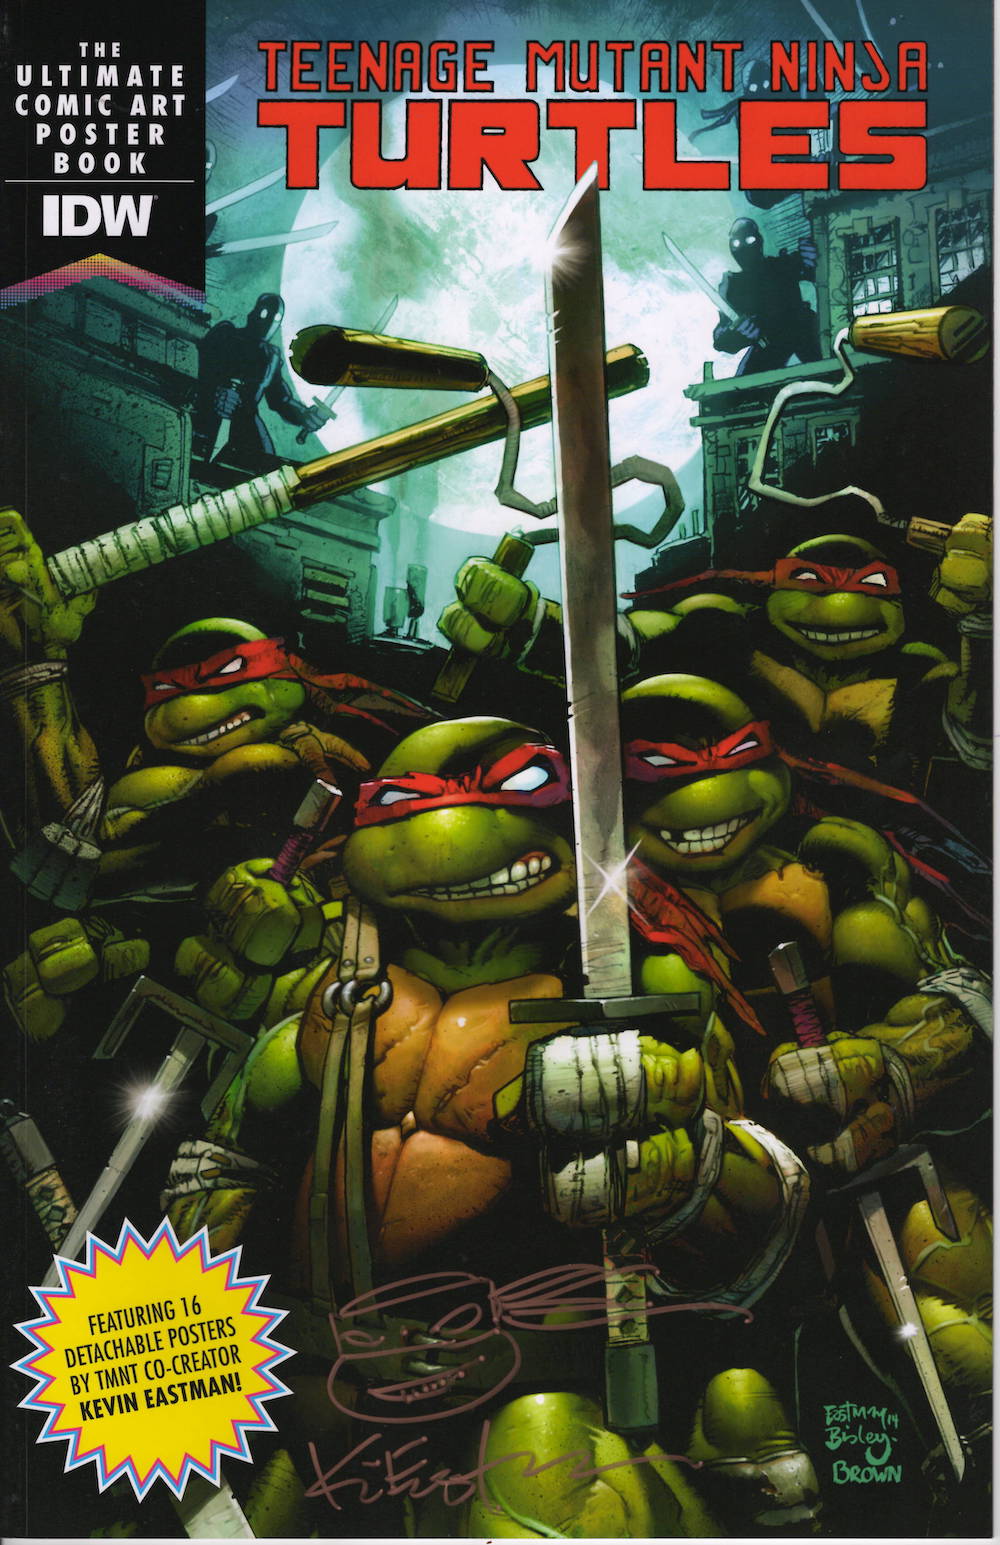 TMNT: The Ultimate Comic Art Poster Book